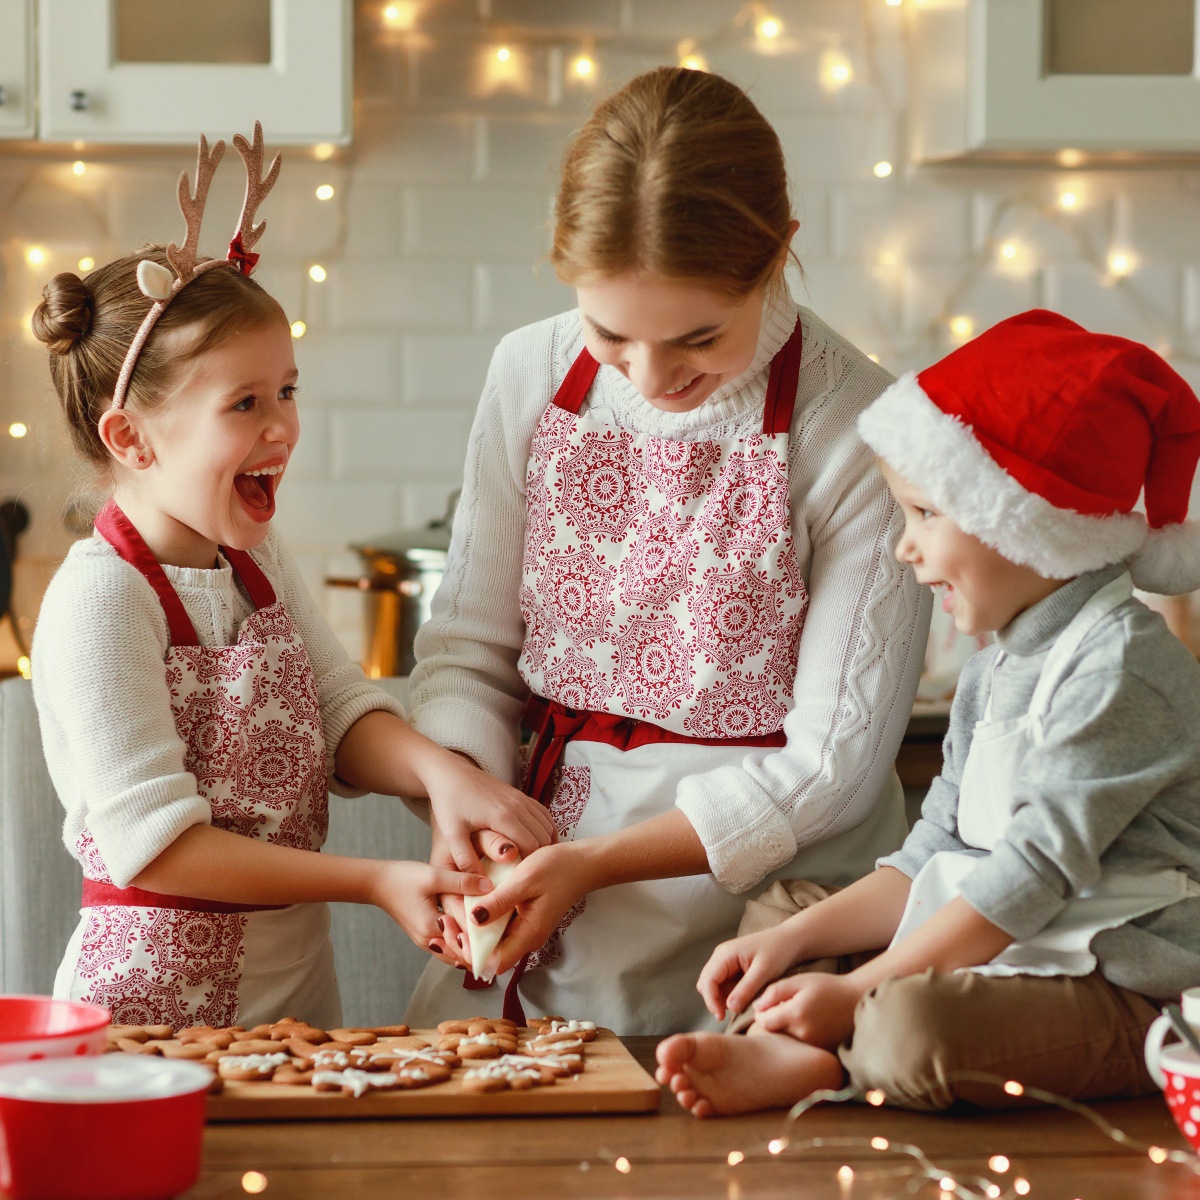 How to Make the Holidays Less Stressful for the Whole Family